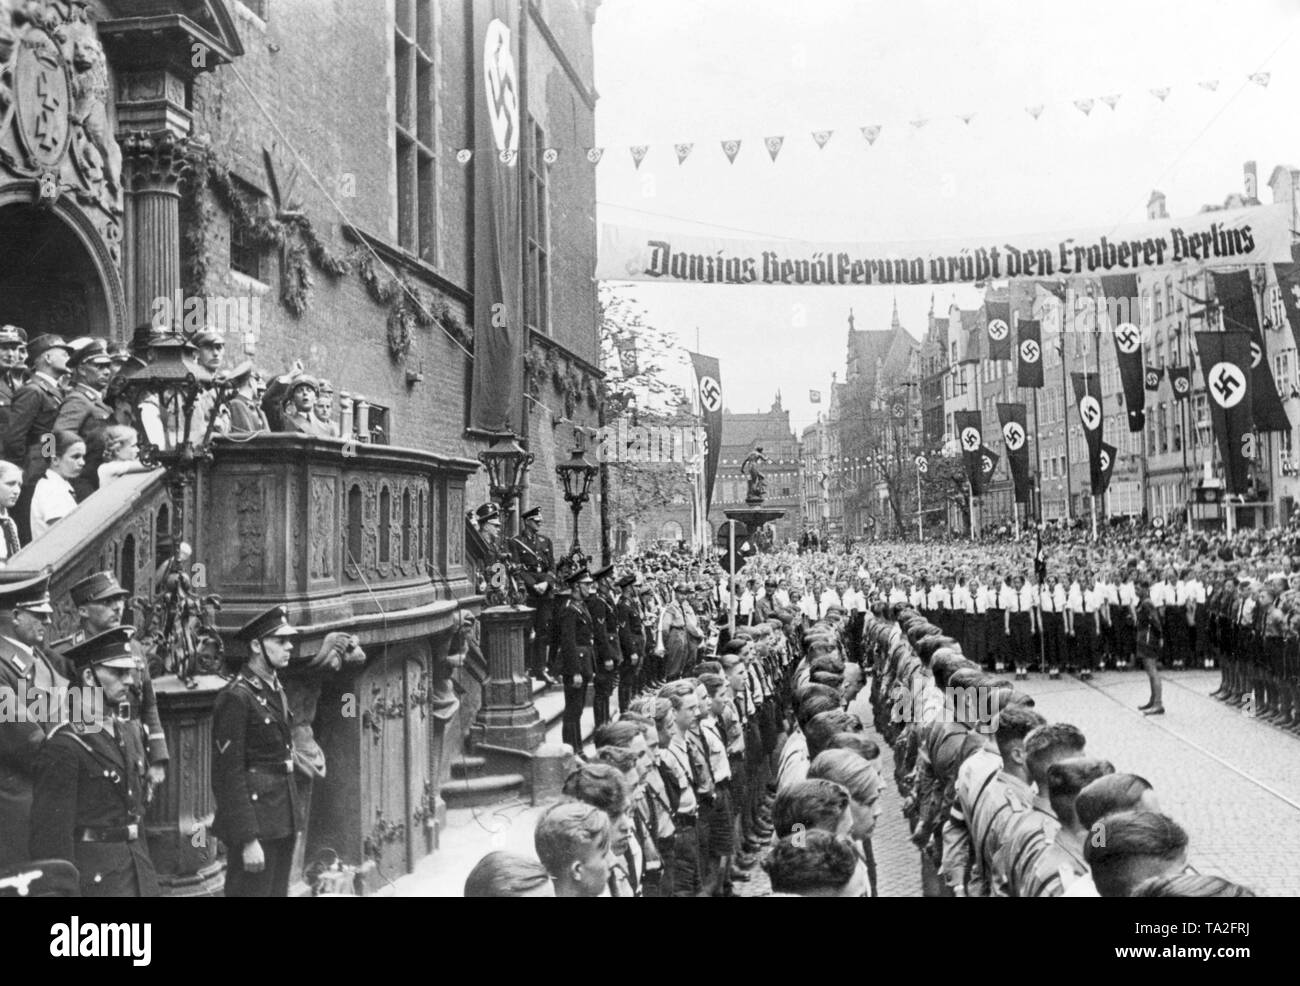 During his visit to Gdansk, the Minister of Propaganda, Joseph Goebbels, addresses to members of the Gdansk Youth Hitler Youth and BDM in front of the Town Hall of Gdansk. Across the street is a banner reading: "Danzig's population greets the conqueror of Berlin." The stairs of the Town Hall are guarded by SS and SA members. Stock Photo